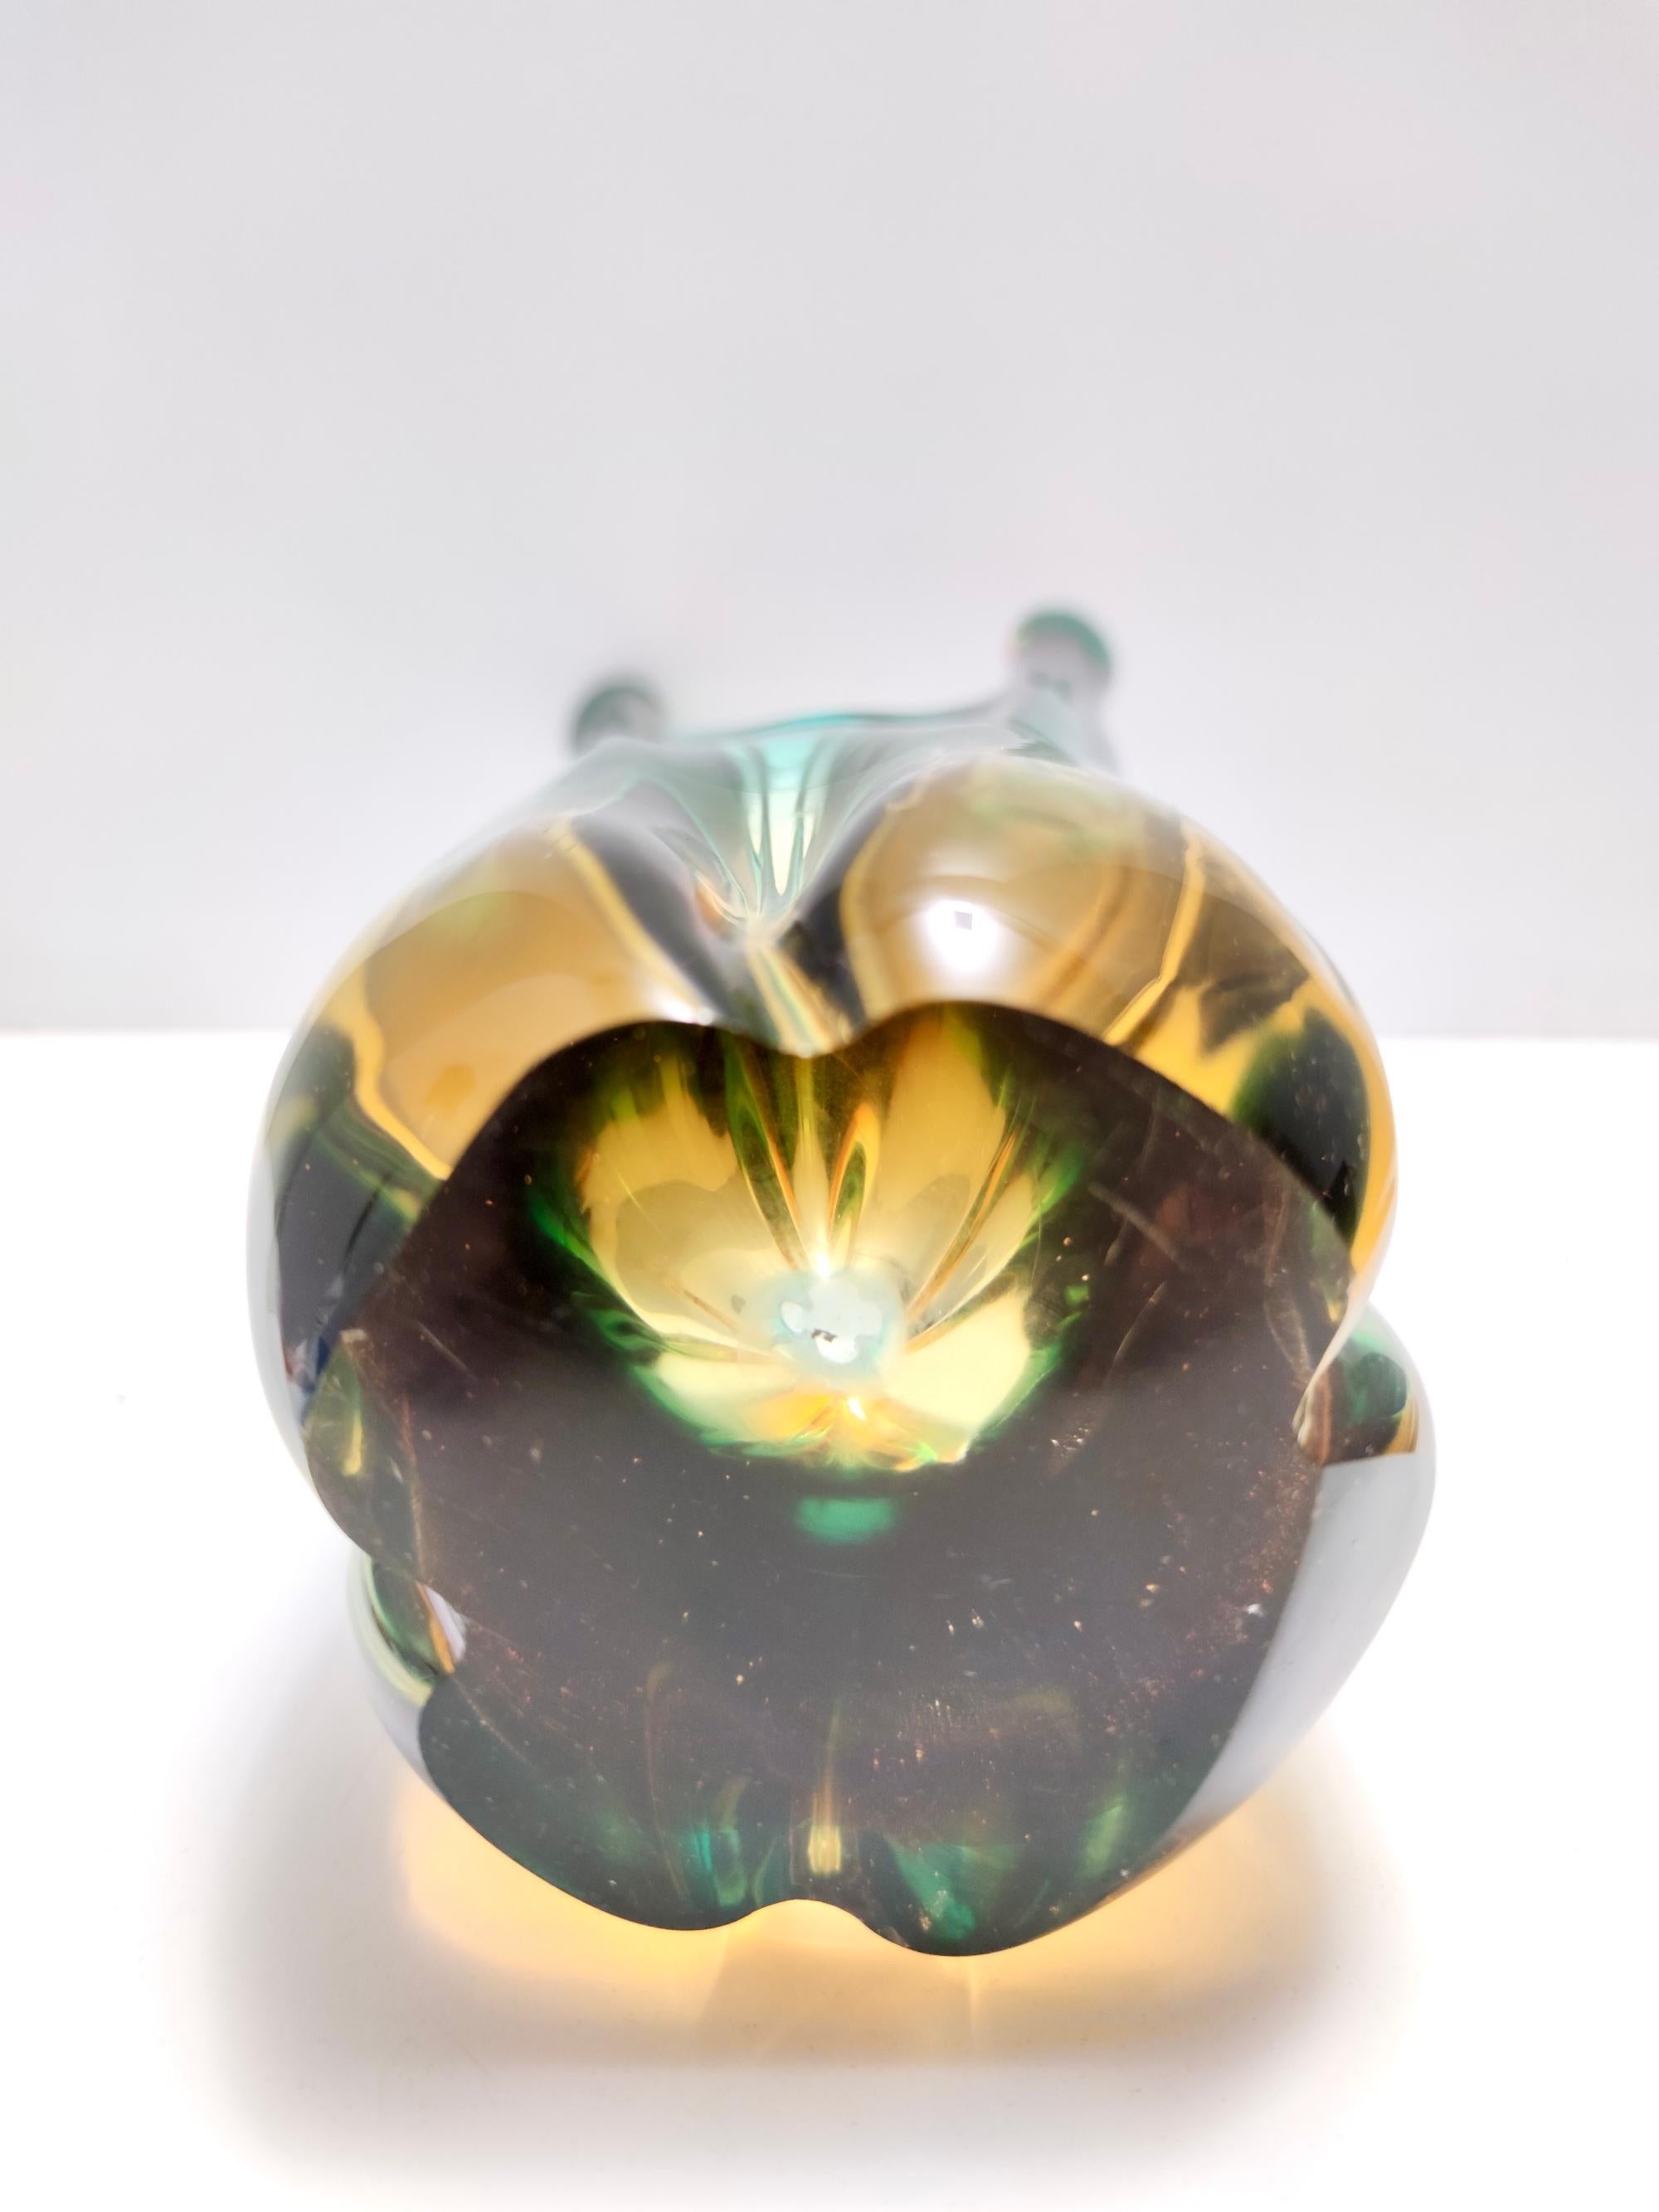 Stunning Vintage Green and Amber Murano Glass Centrepiece Vase, Italy For Sale 6